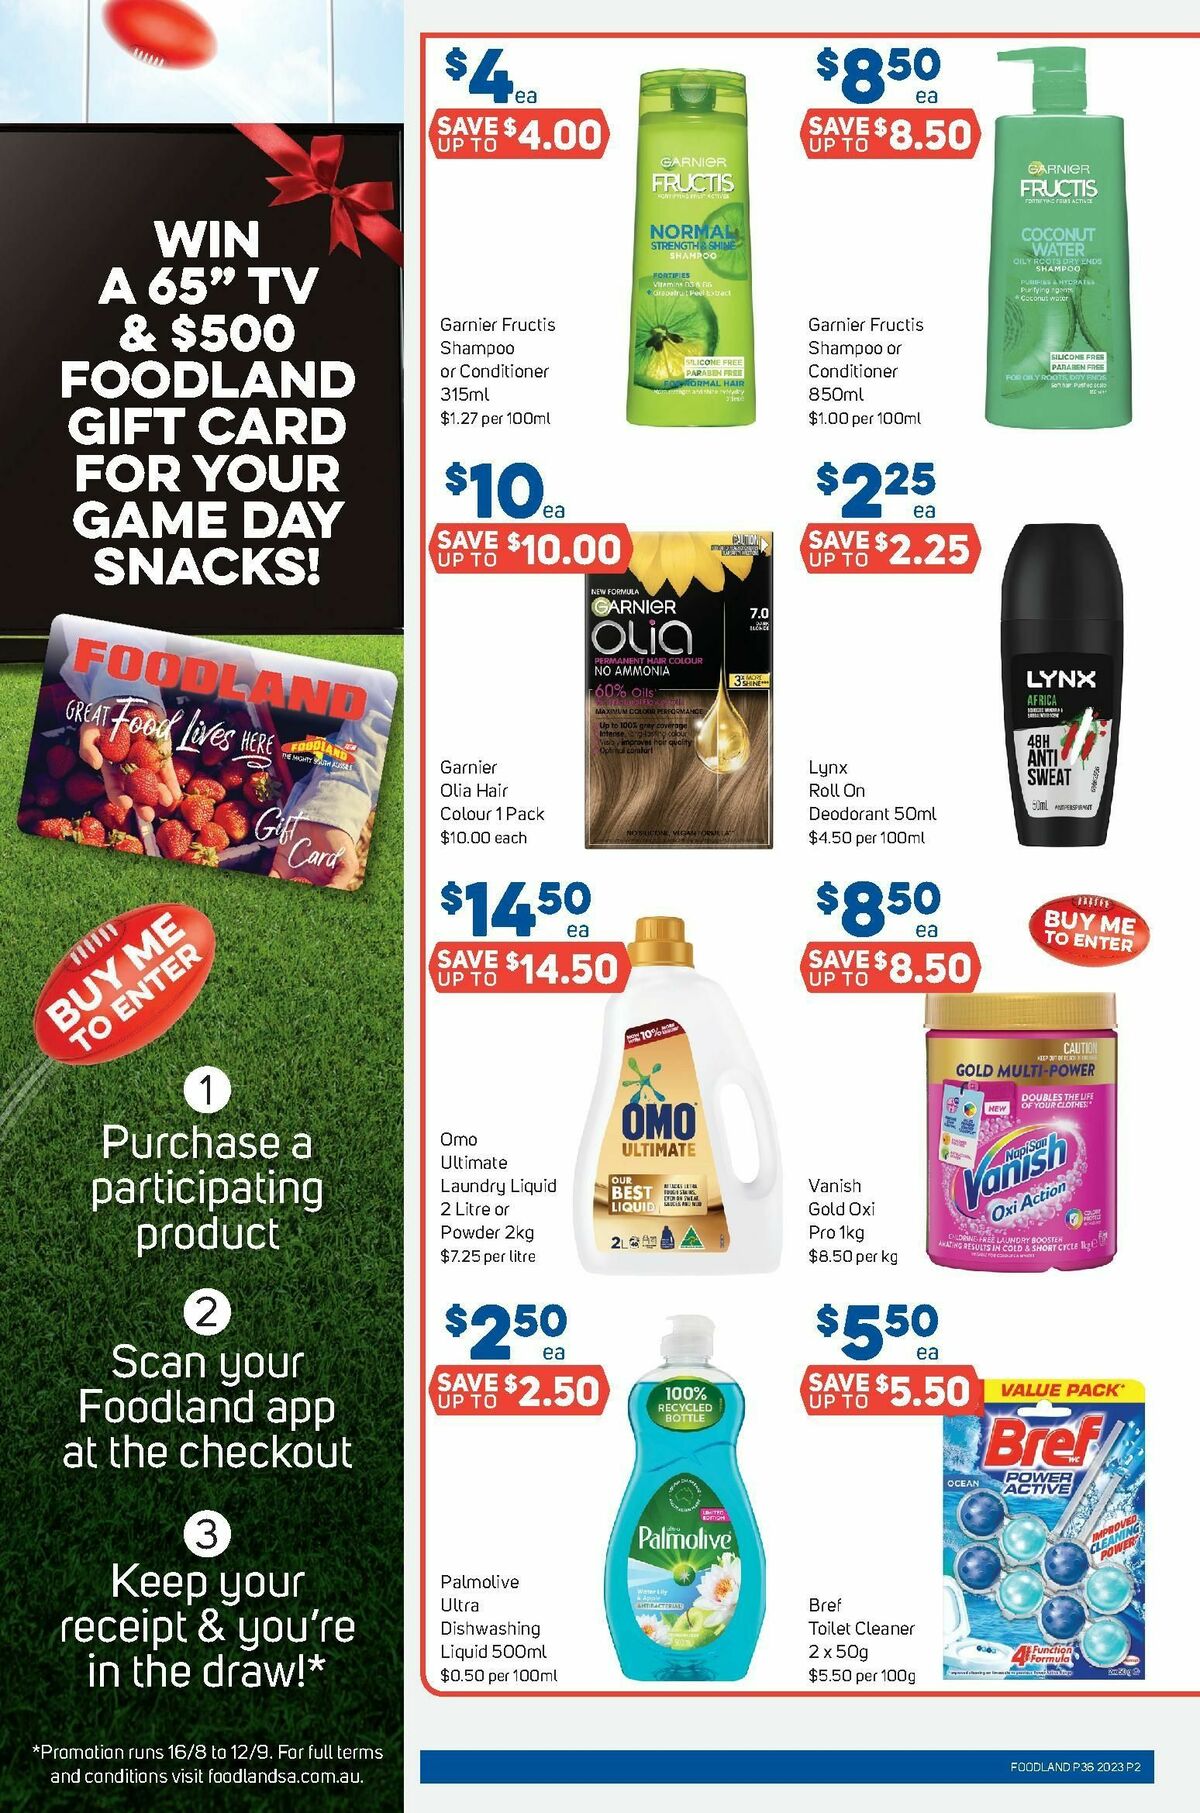 Foodland Catalogues from 6 September